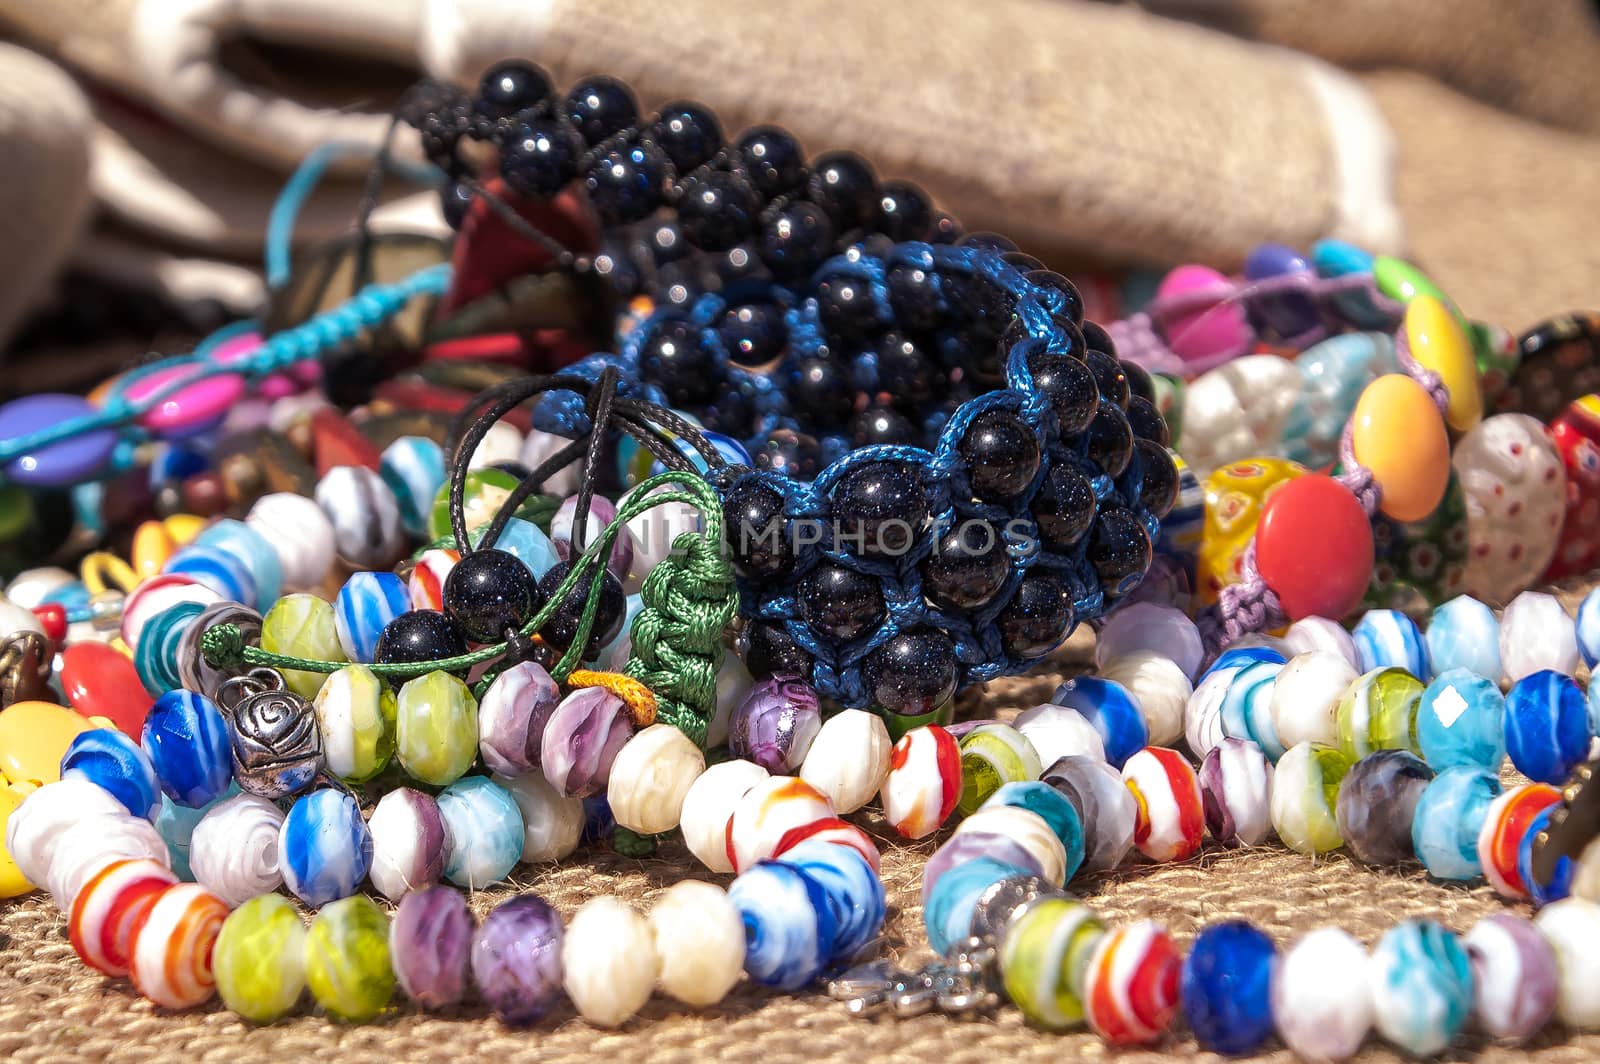 Different bright, multi-colored jewelry of handwork in a sunlight